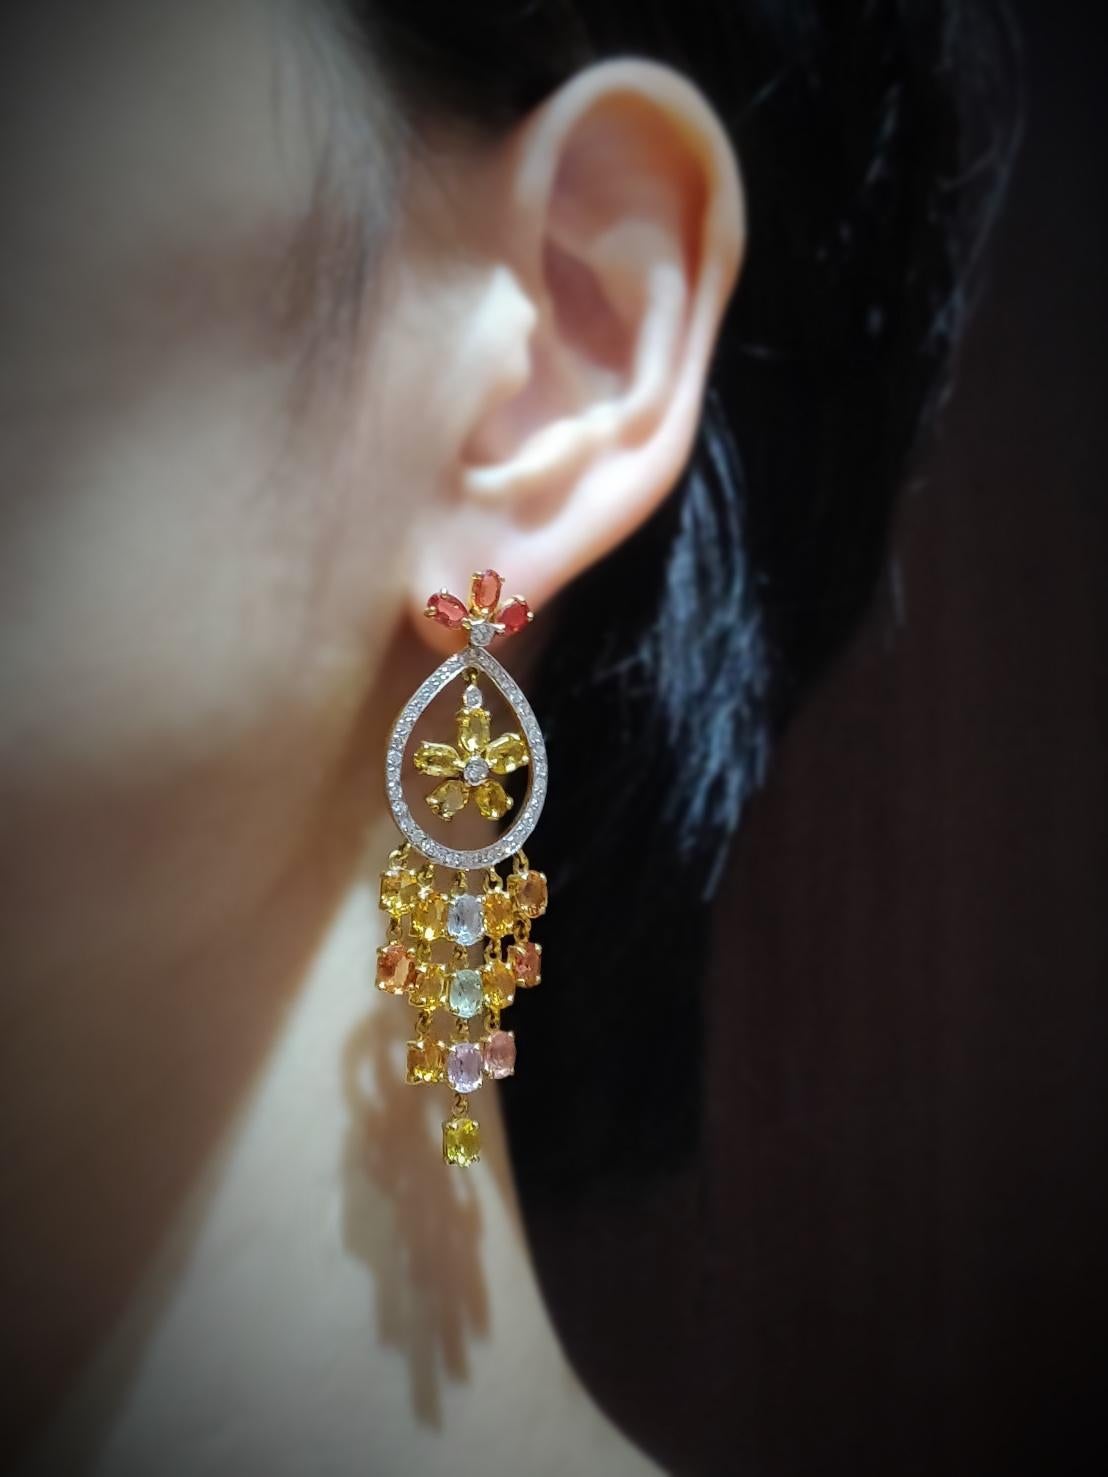 Summery earrings that will remind you of a holiday in Sicily, the cool sea breeze that wafts through the window and the scent of lemons and oranges from the citrus grove.

Gold: 18K Yellow Gold, 17.75 g
Diamond: 1.21 ct
Stones: Yellow Sapphire,